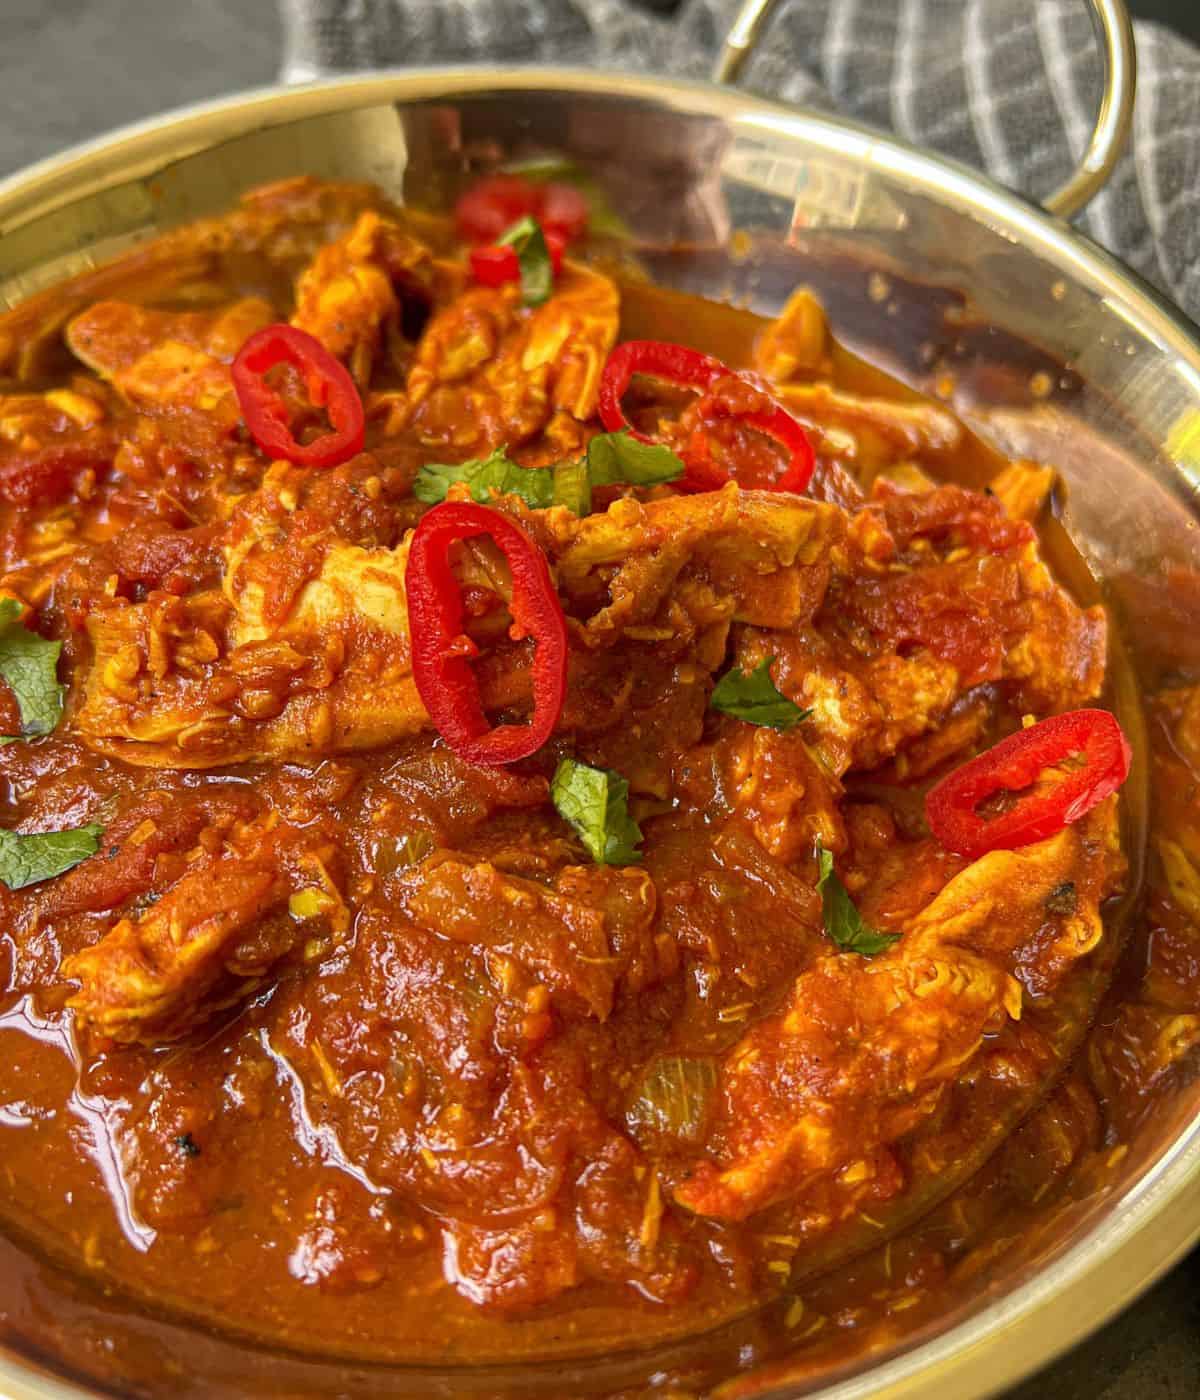 A bowl of chicken curry garnished with red chilli.